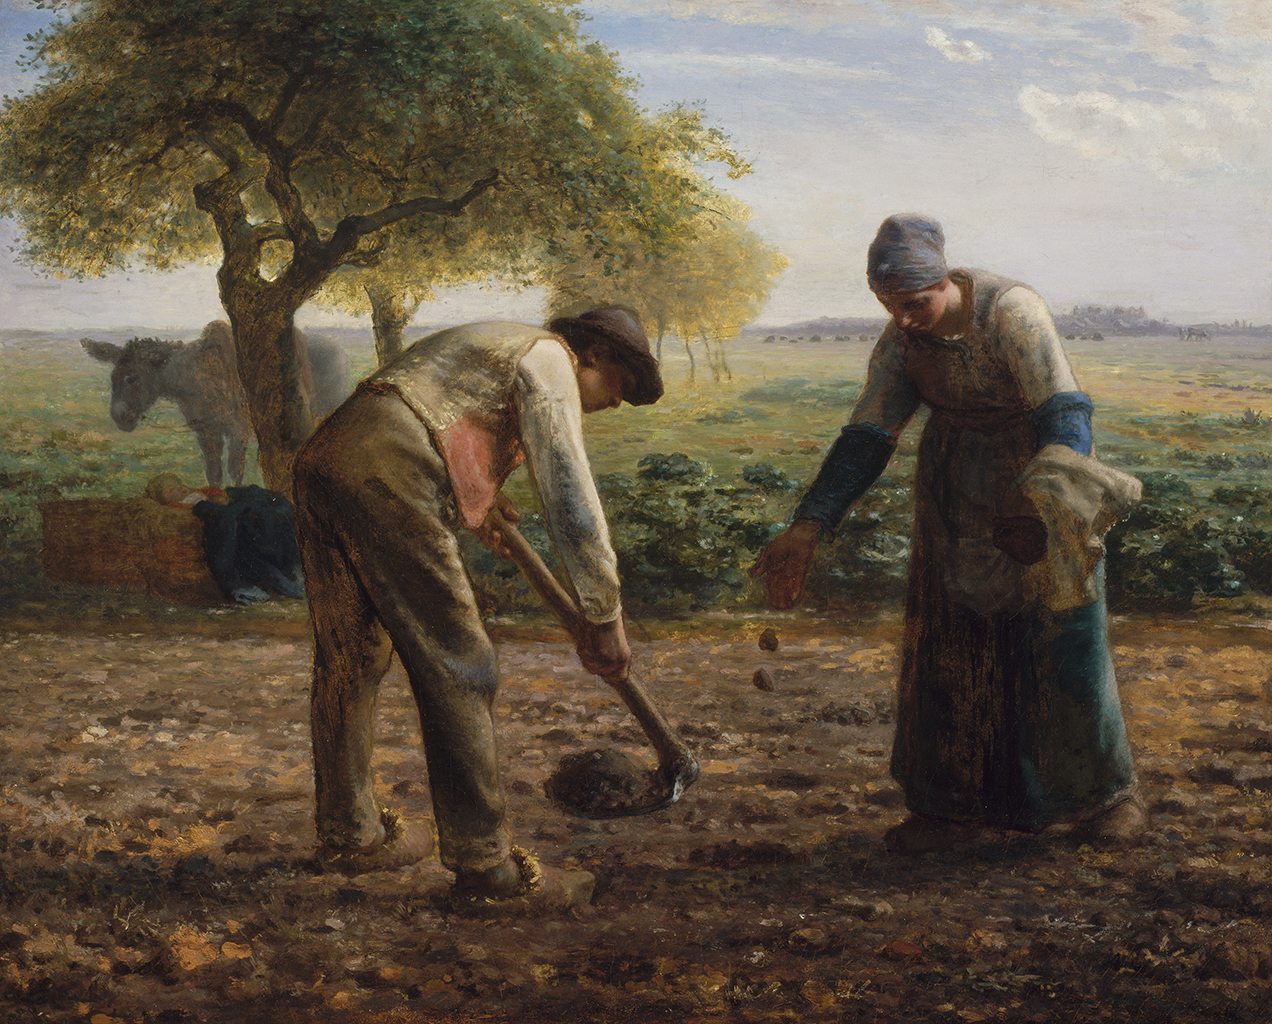 A painting of a man and woman in a dirt field. The man is dragging a tool through the dirt while a woman is seemingly dropping seeds into the holes. In the background there is a tree with a donkey standing under it.